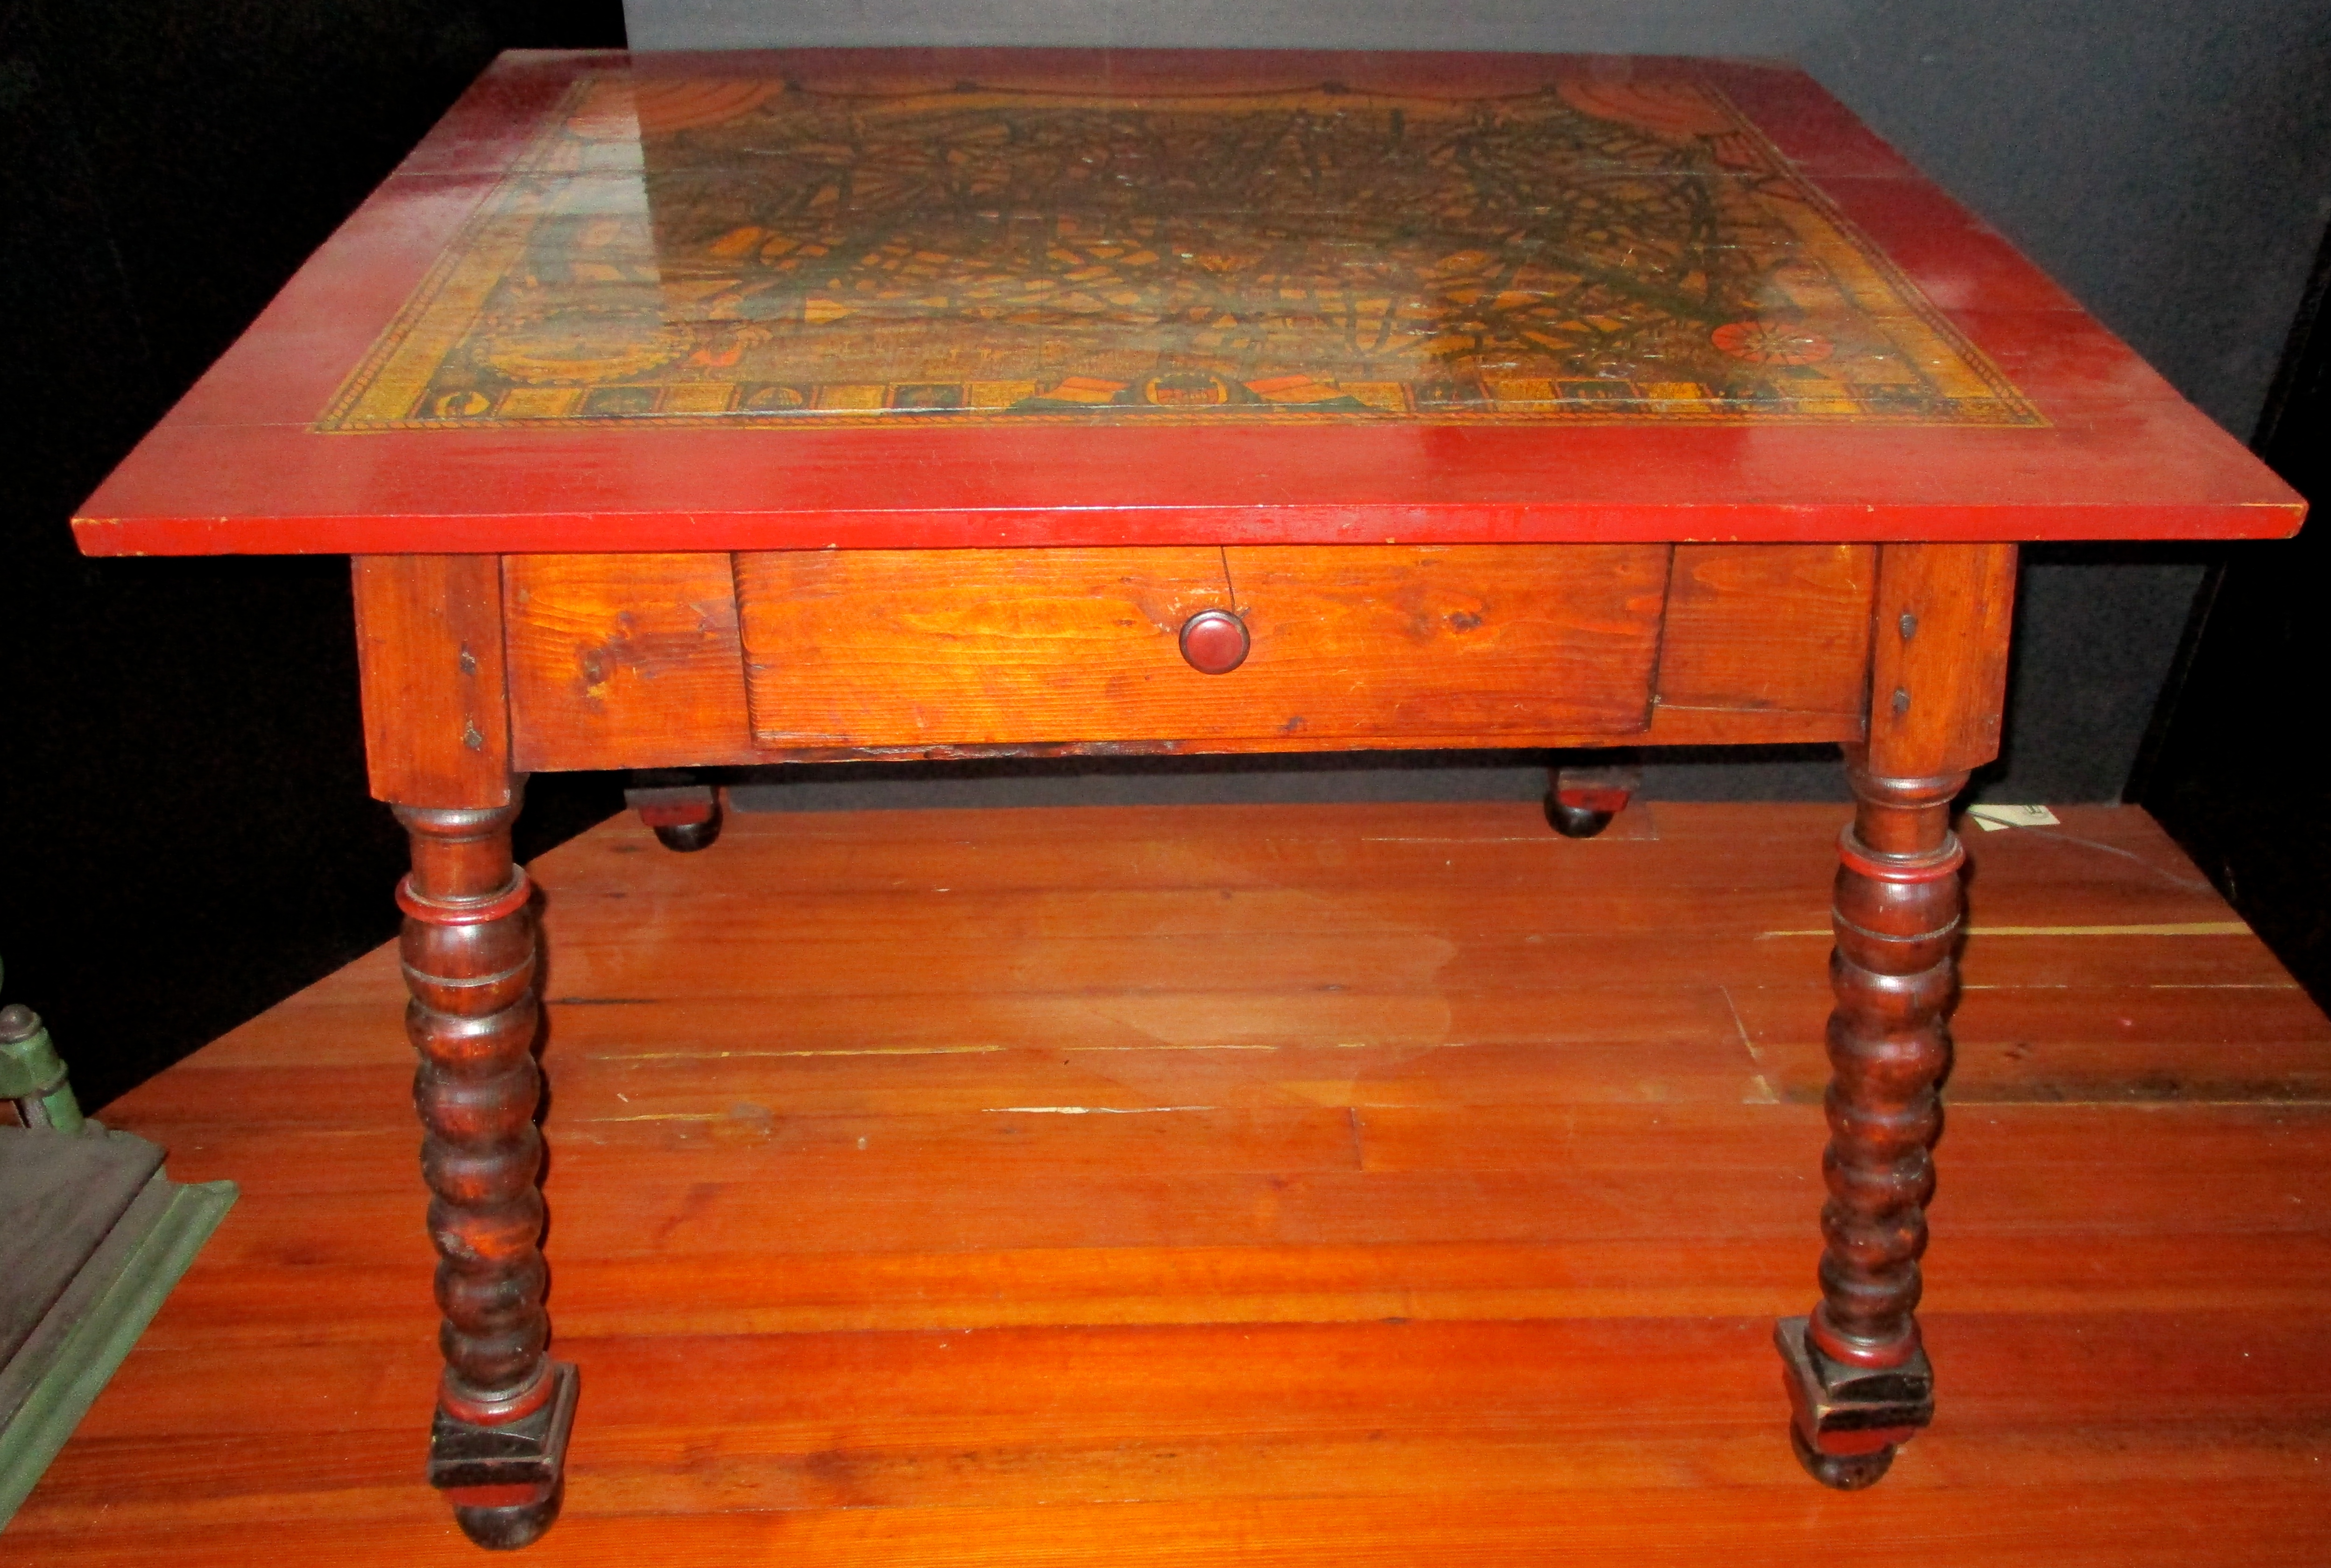 Early 1900's French Painted Pine Table w/Later Decoupage Paris Metro Map on Top